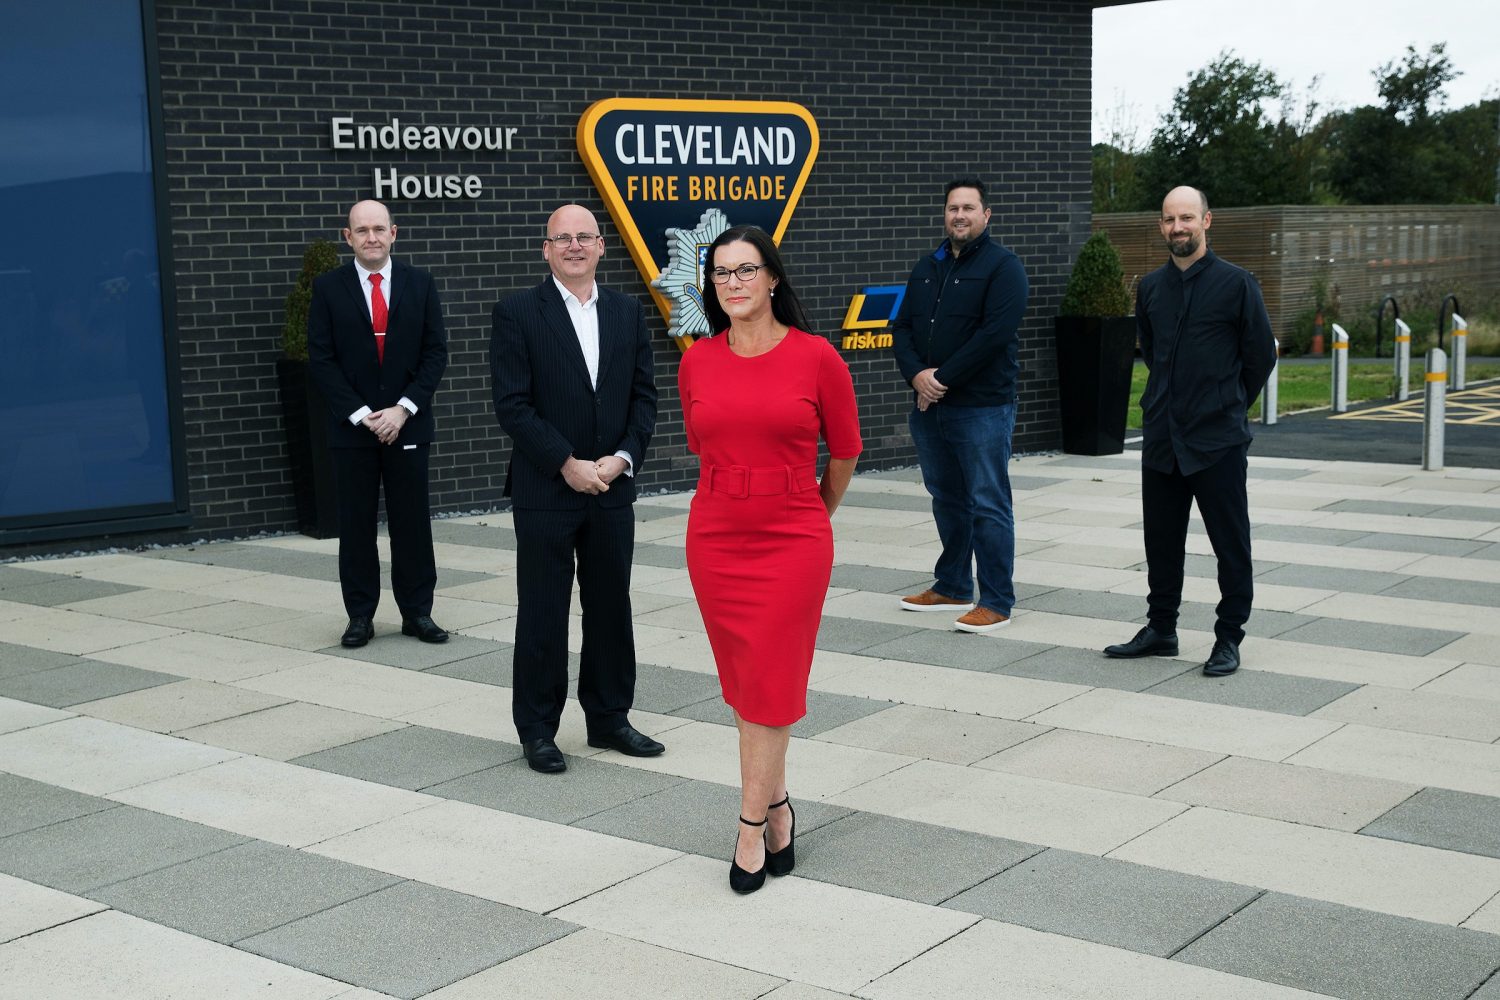 Business woman in a red dress standing in front of four business men. They are outside standing near a brick wall with signage for Cleveland Fire Brigade.